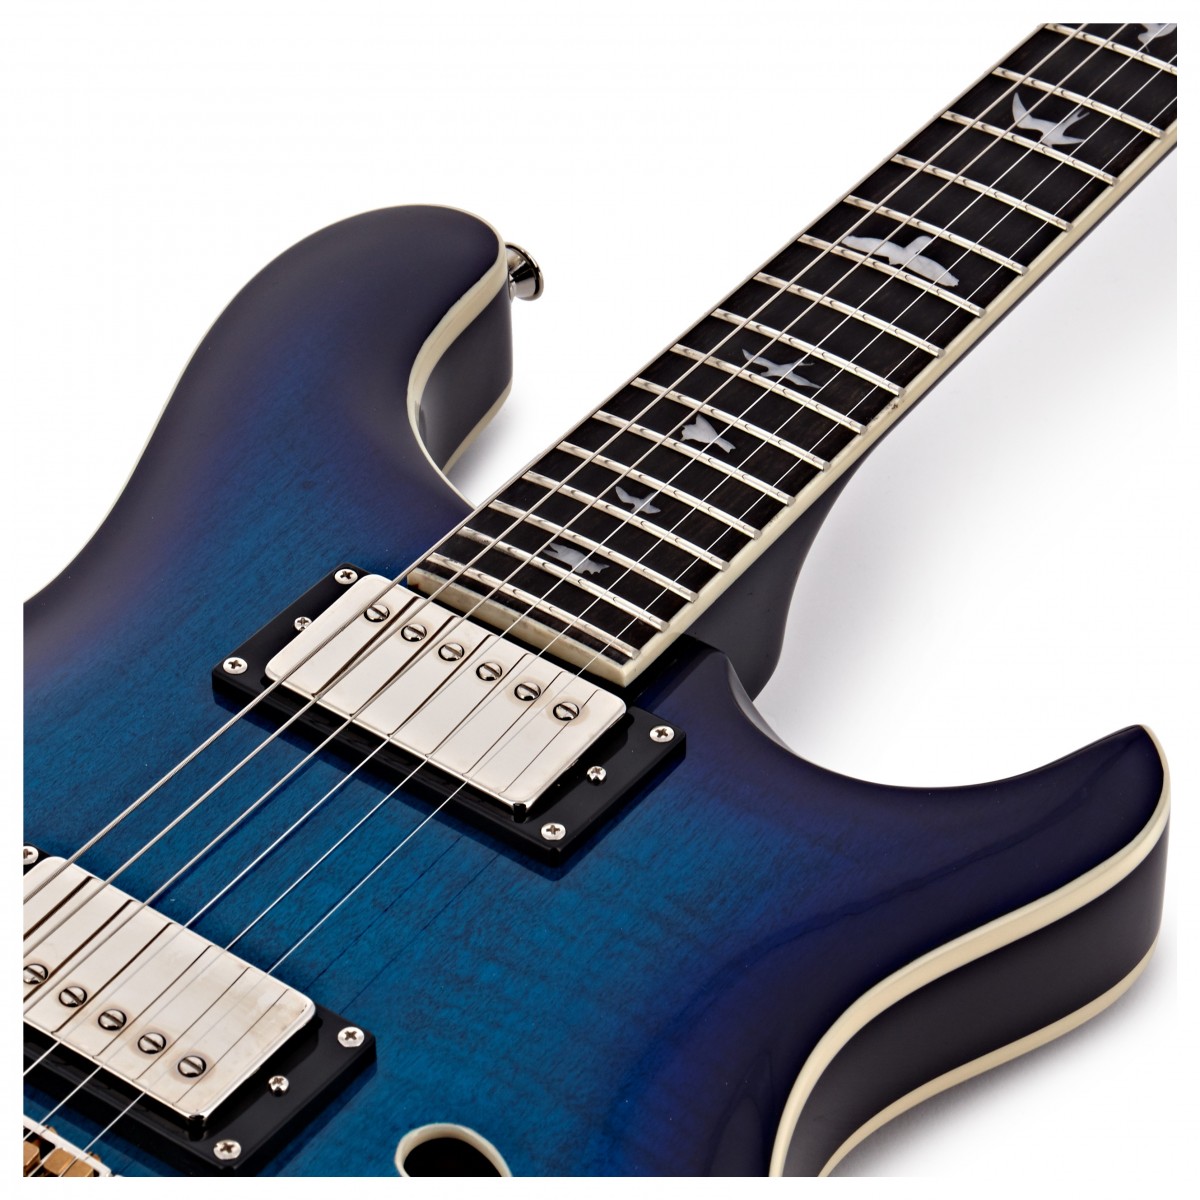 Prs Se Hollow Body Ii Hh Ht Eb - Faded Blue Burst - Semi-hollow electric guitar - Variation 4